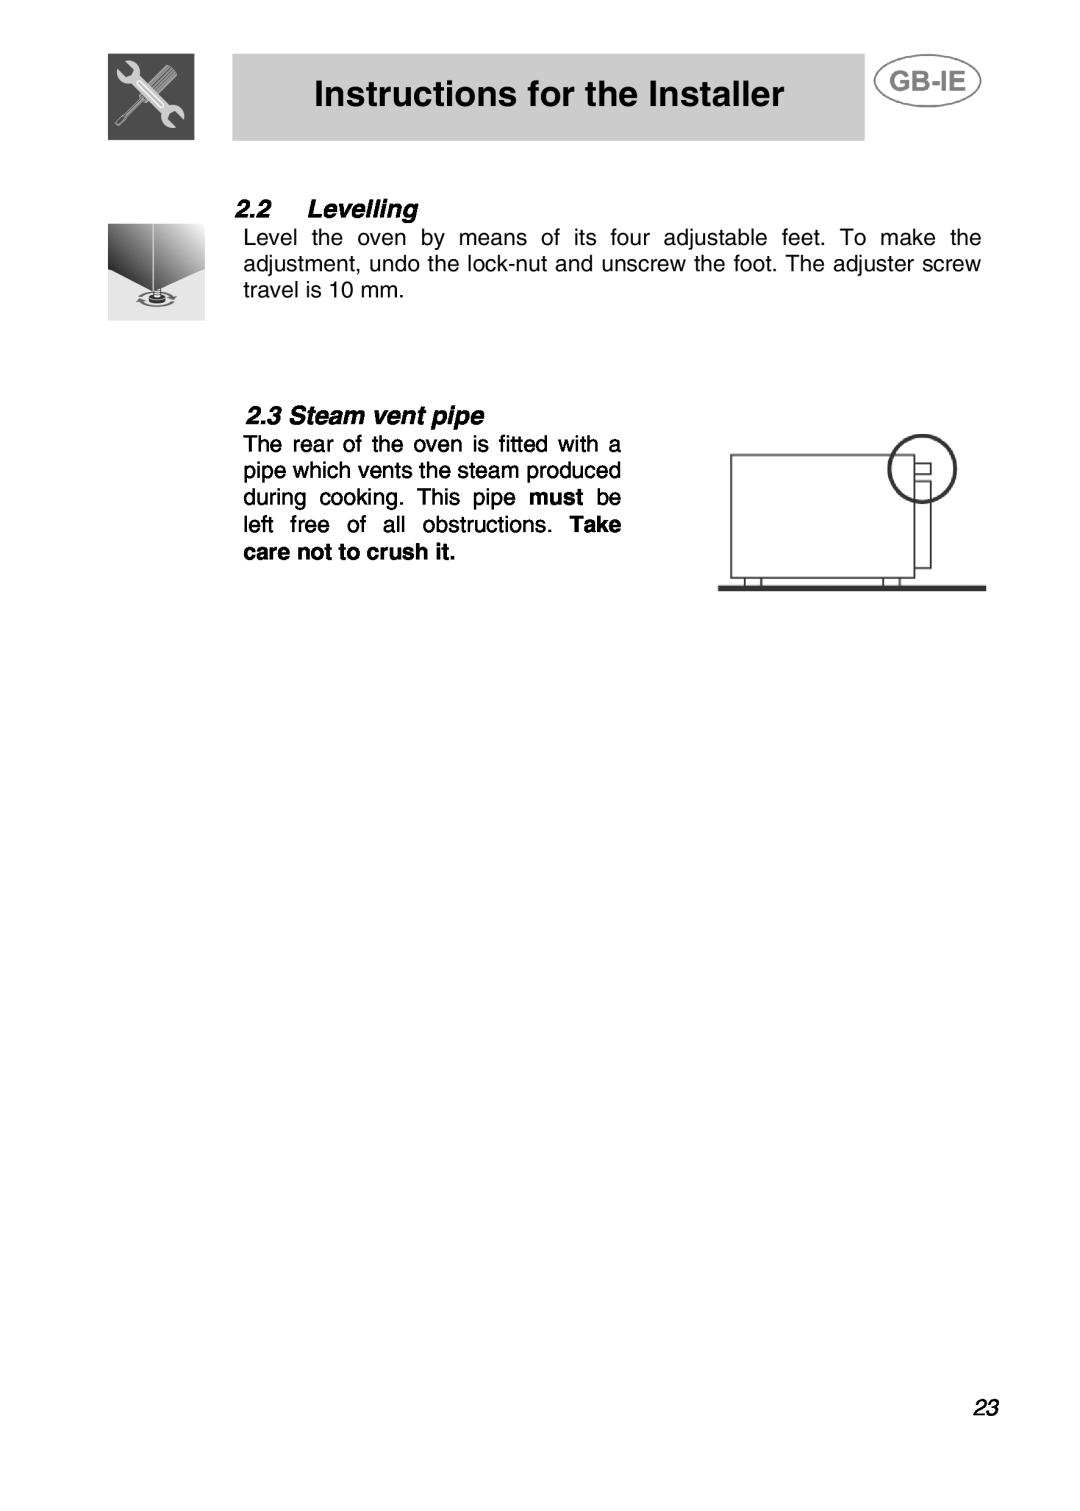 Smeg ALFA41XEN manual Levelling, Steam vent pipe, Instructions for the Installer 